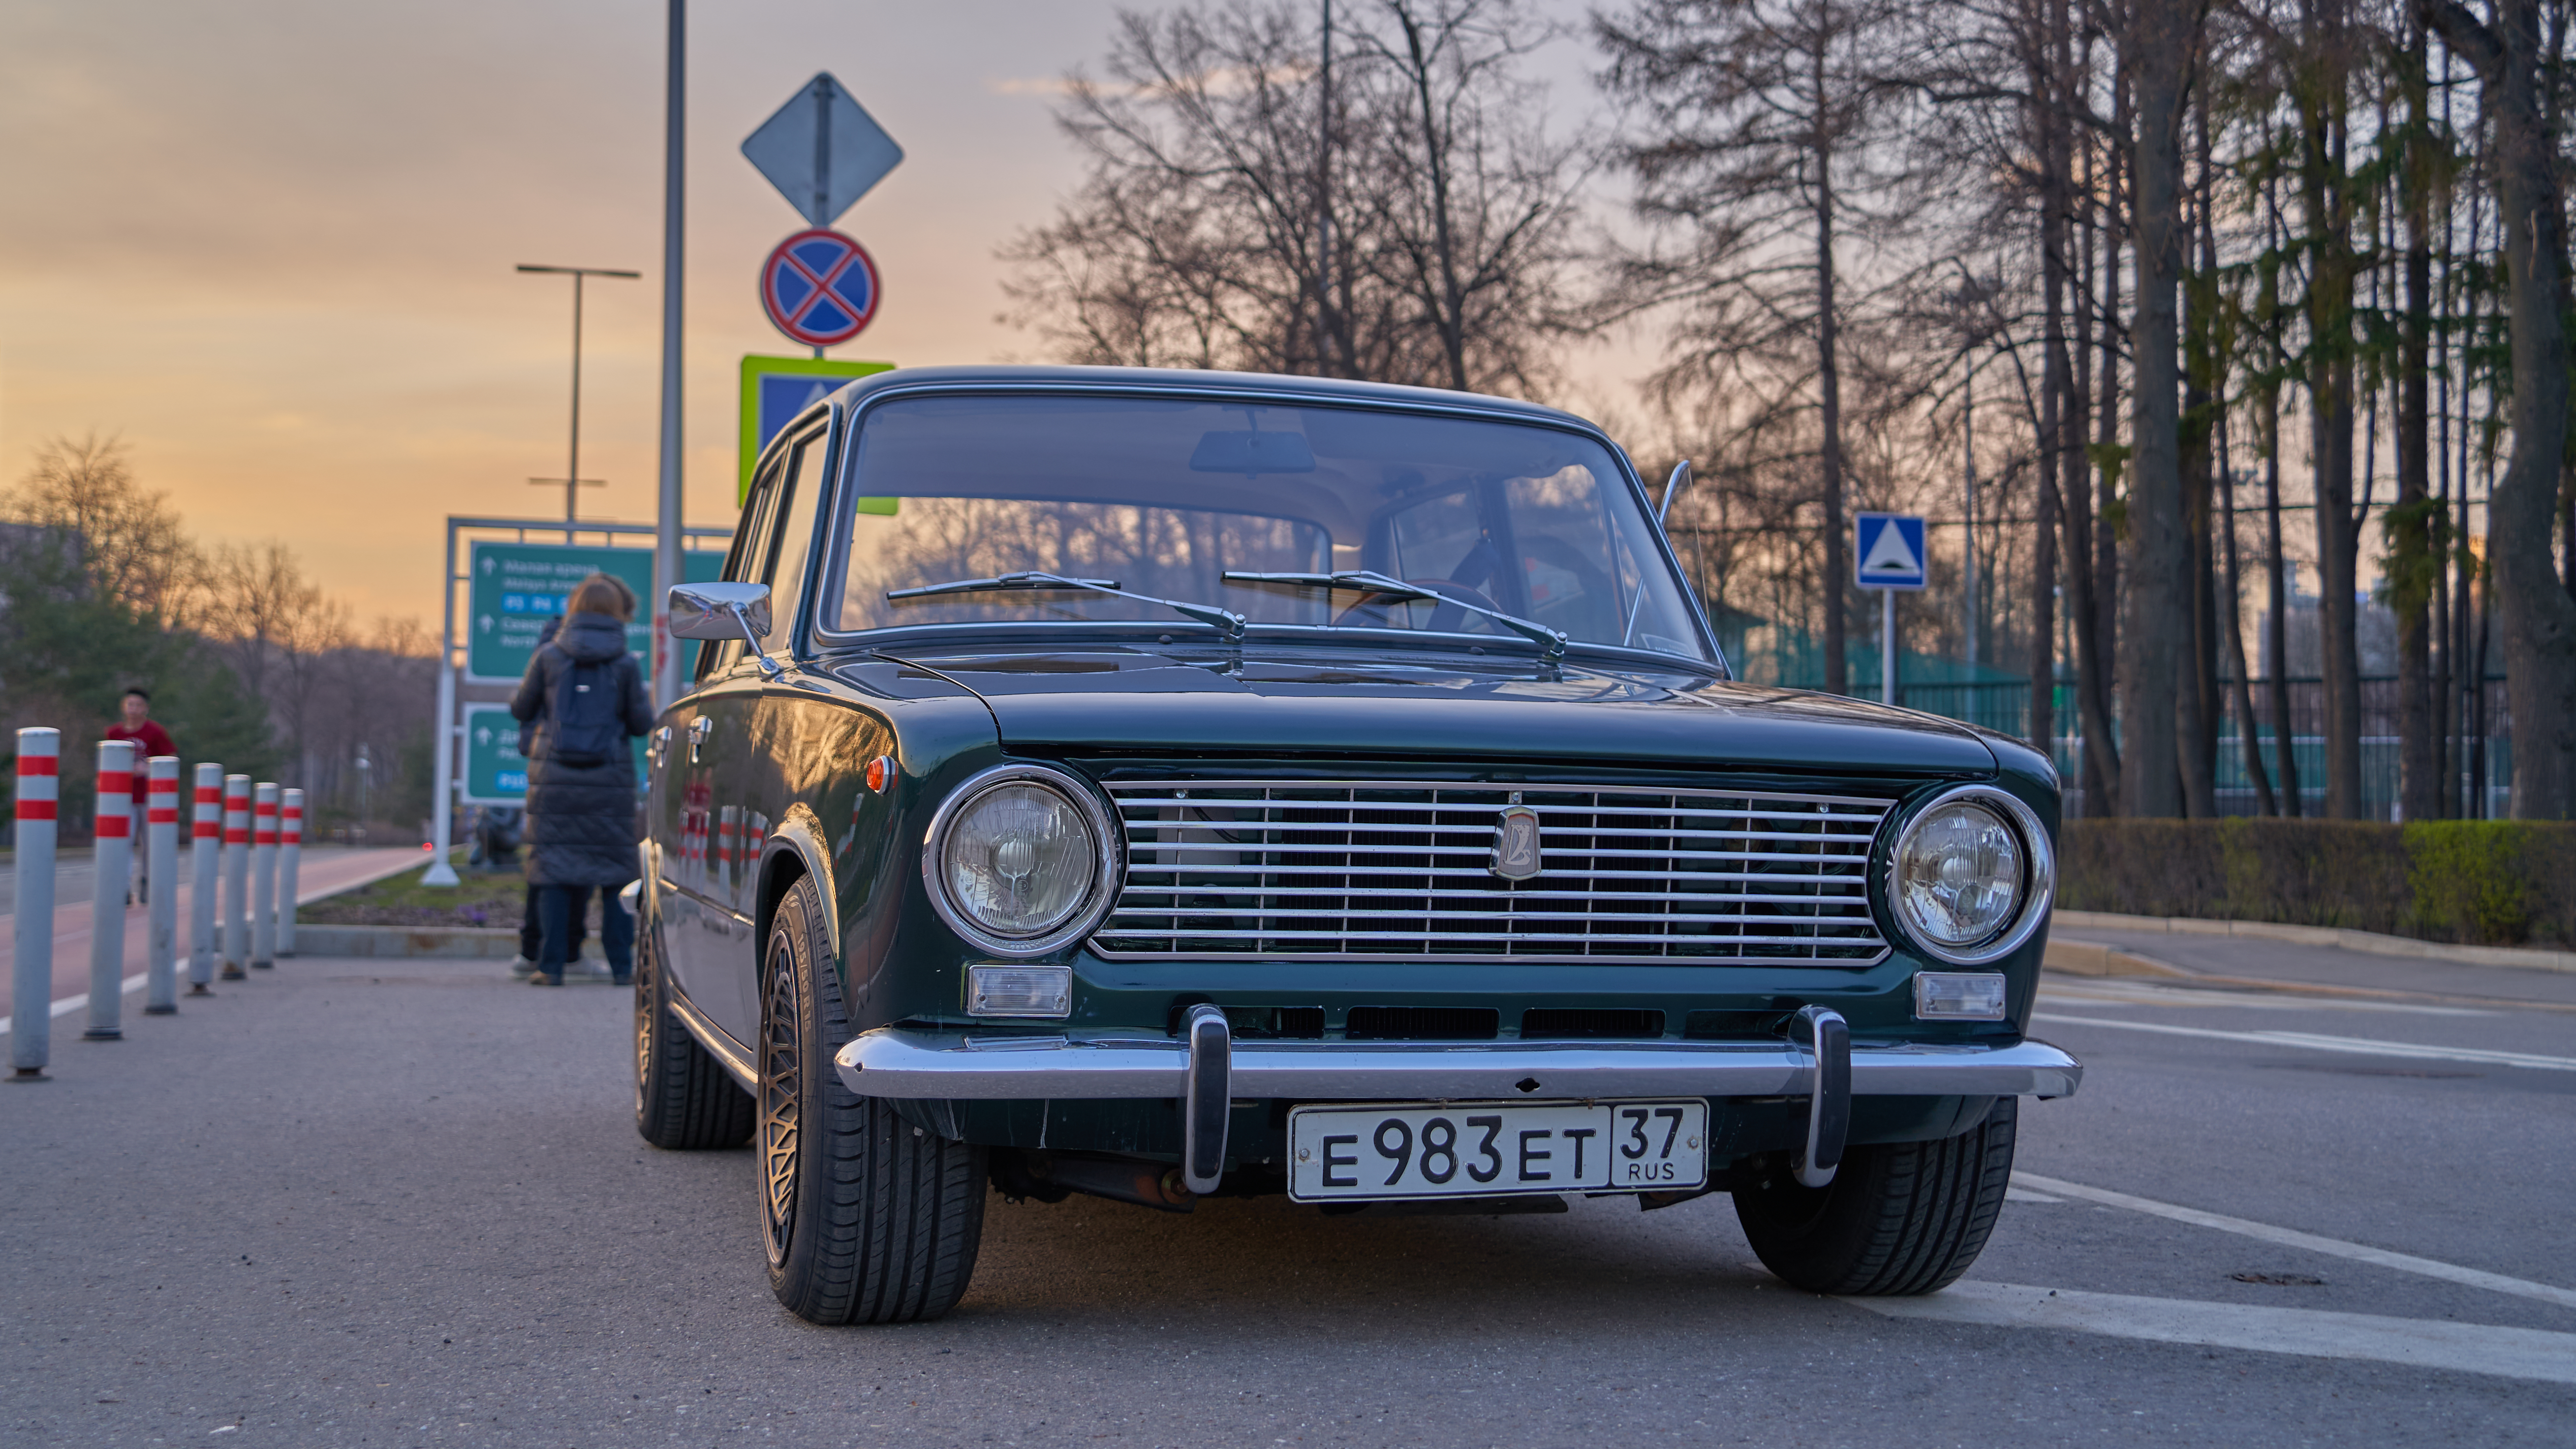 General 5235x2945 car LADA Russian cars Moscow sunset road frontal view sunset glow trees Russia